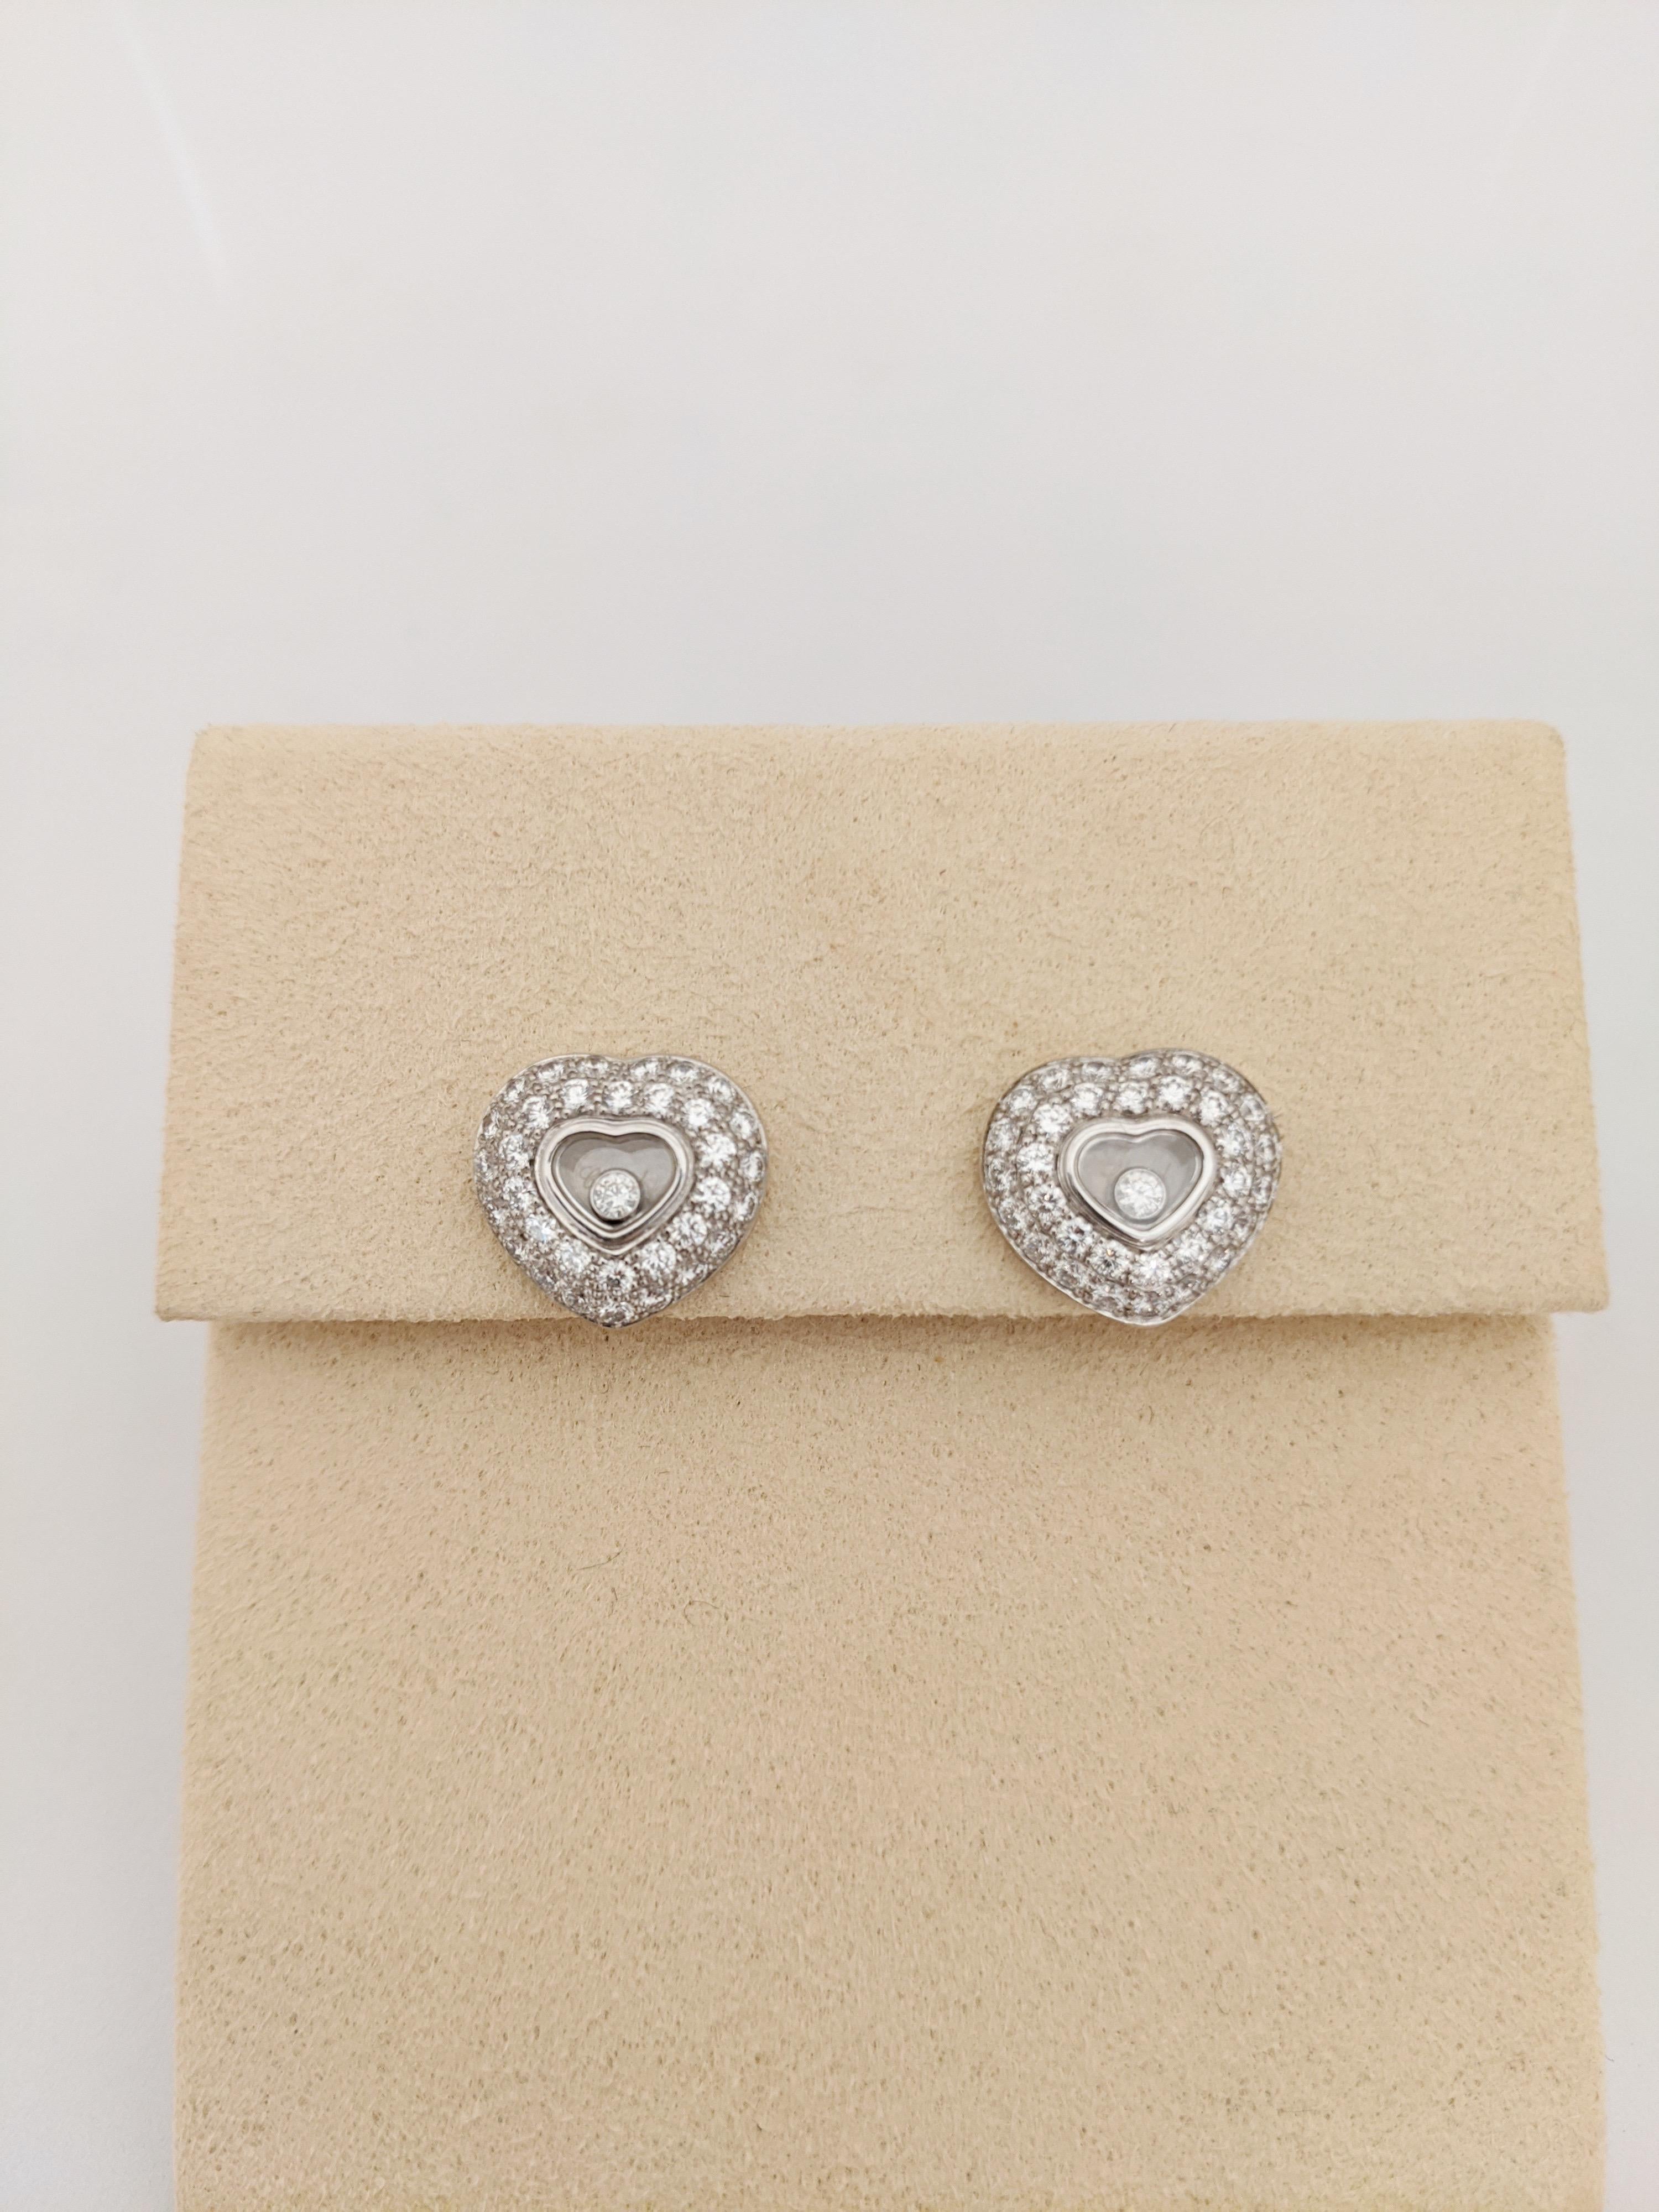 Chopard 18 KT White Gold & Diamond classic heart stud earrings. These earrings are designed with 2 rows of round brilliant pave diamonds and 1 single bezel set floating diamond in each ear. The diamond settings give the hearts a puffed heart